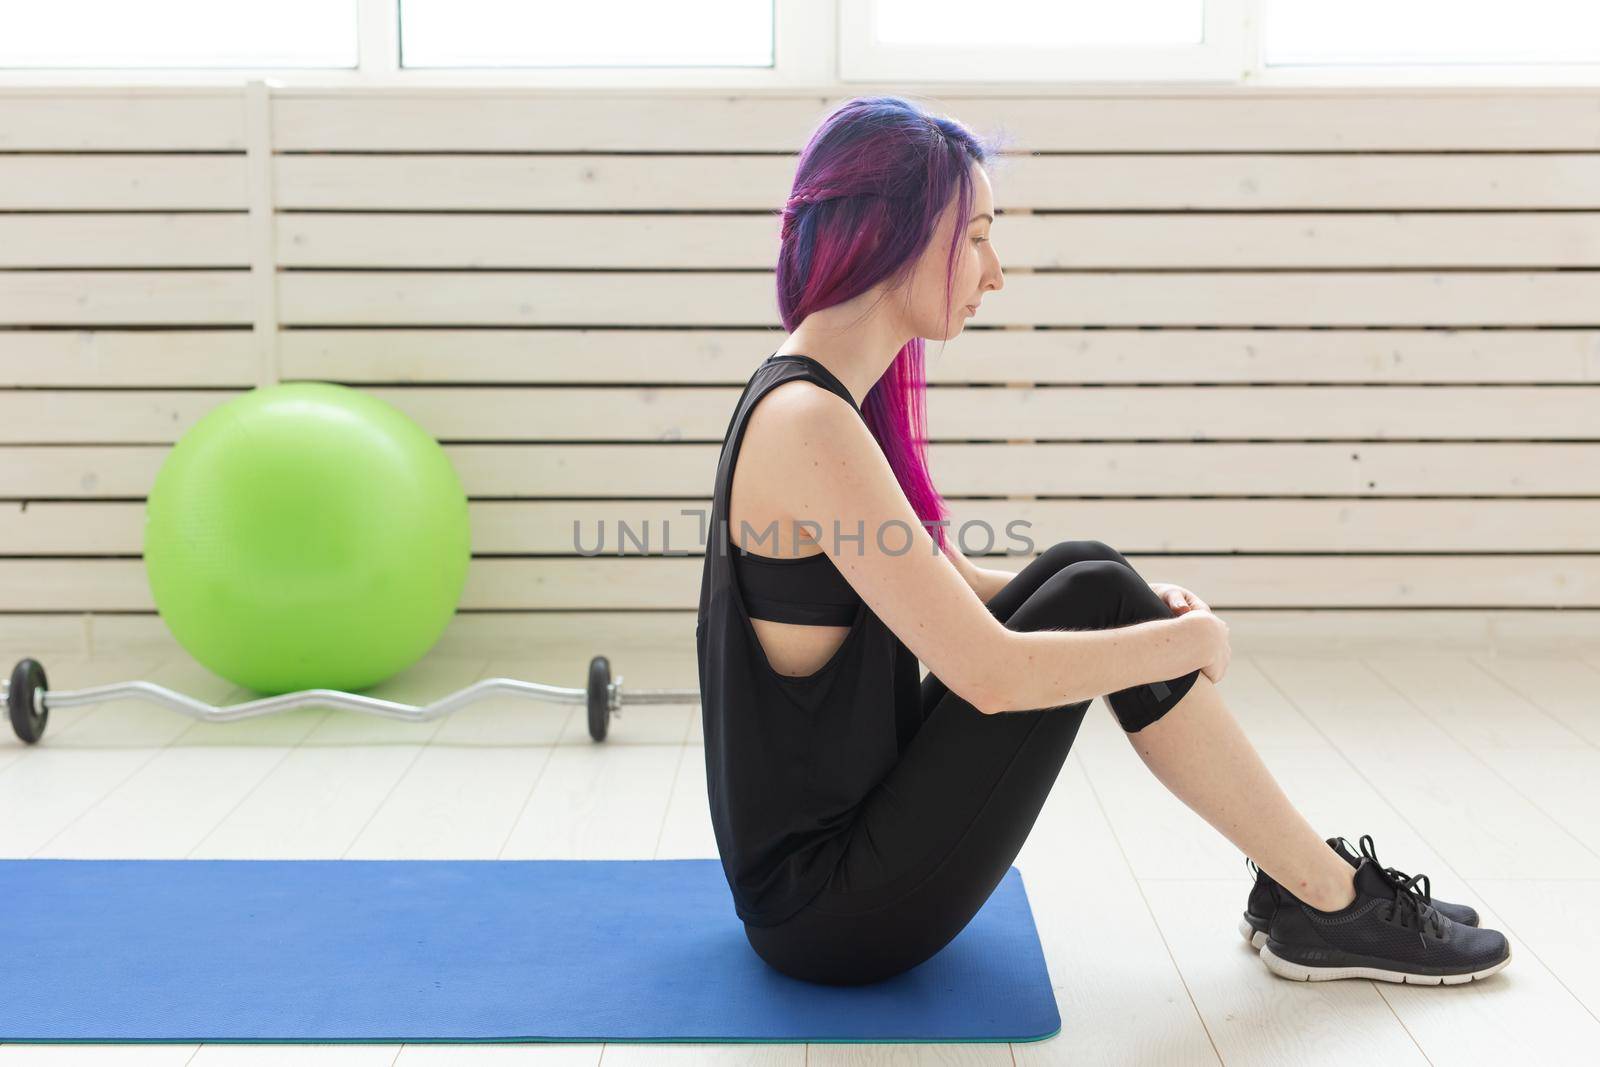 Young slim girl with colored hair makes an headstand on a sports blue mattress next to a barbell and green fitball. Concept of good physical fitness and regular training in the gym